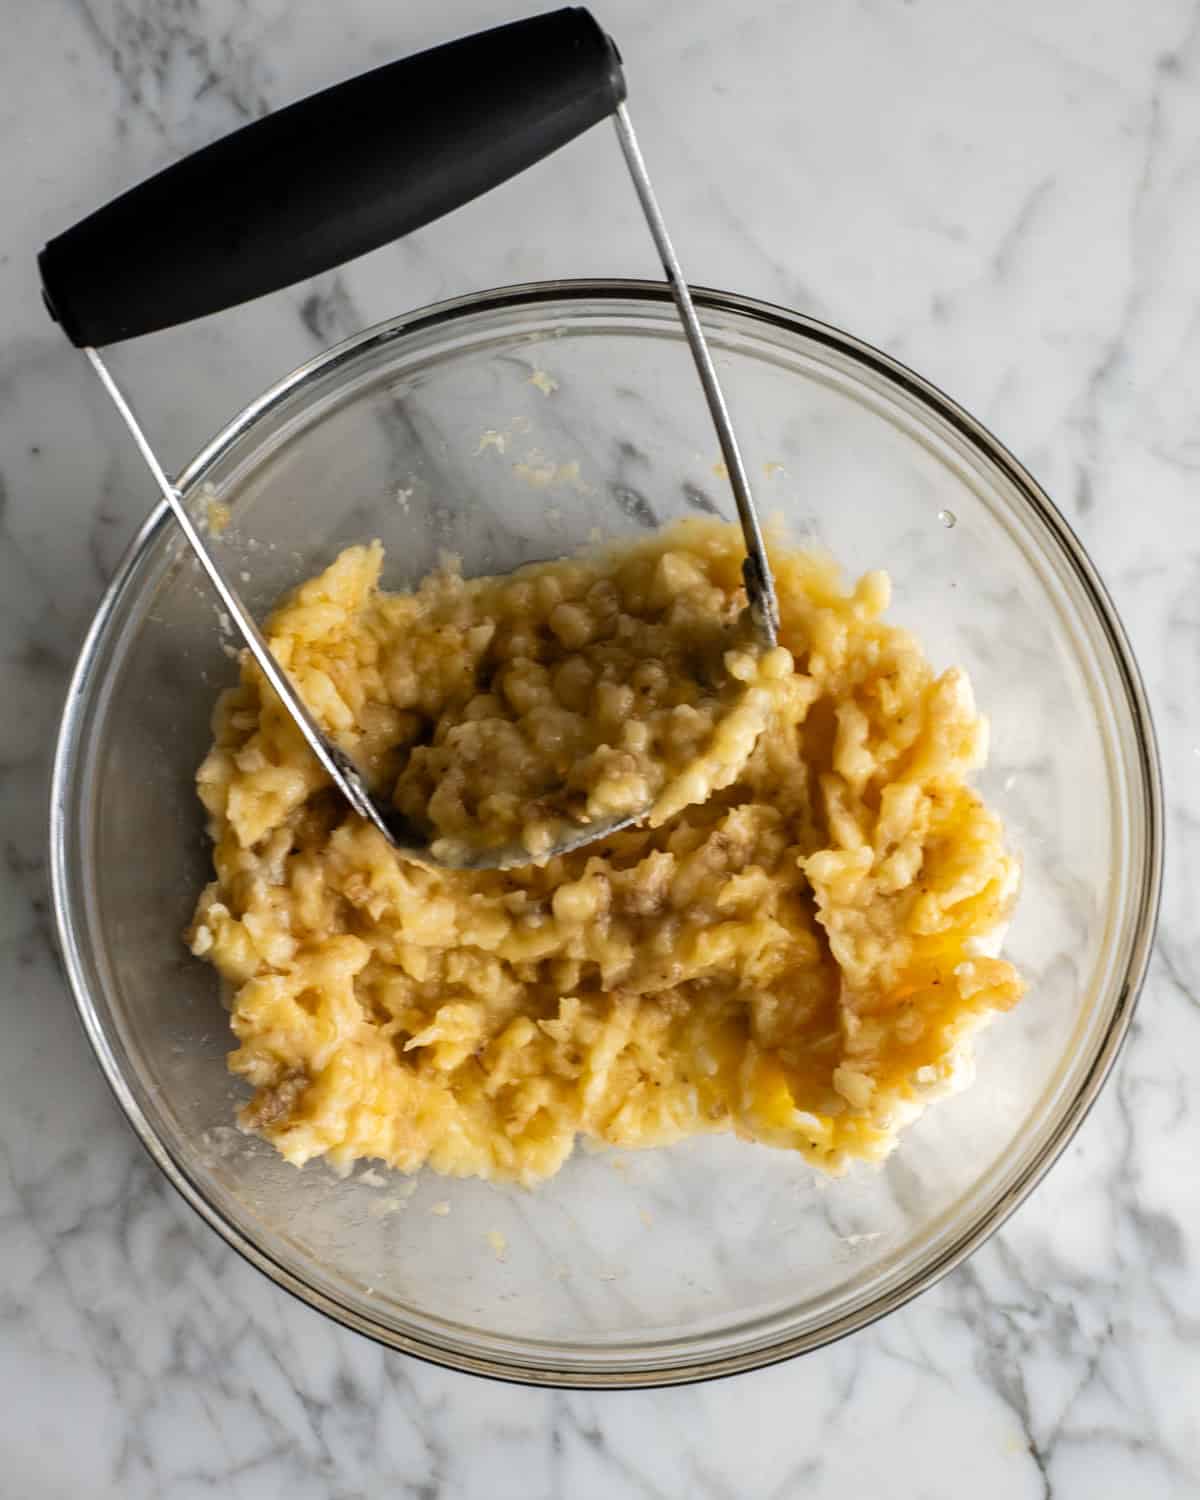 mashed banana in a glass bowl with a potato masher